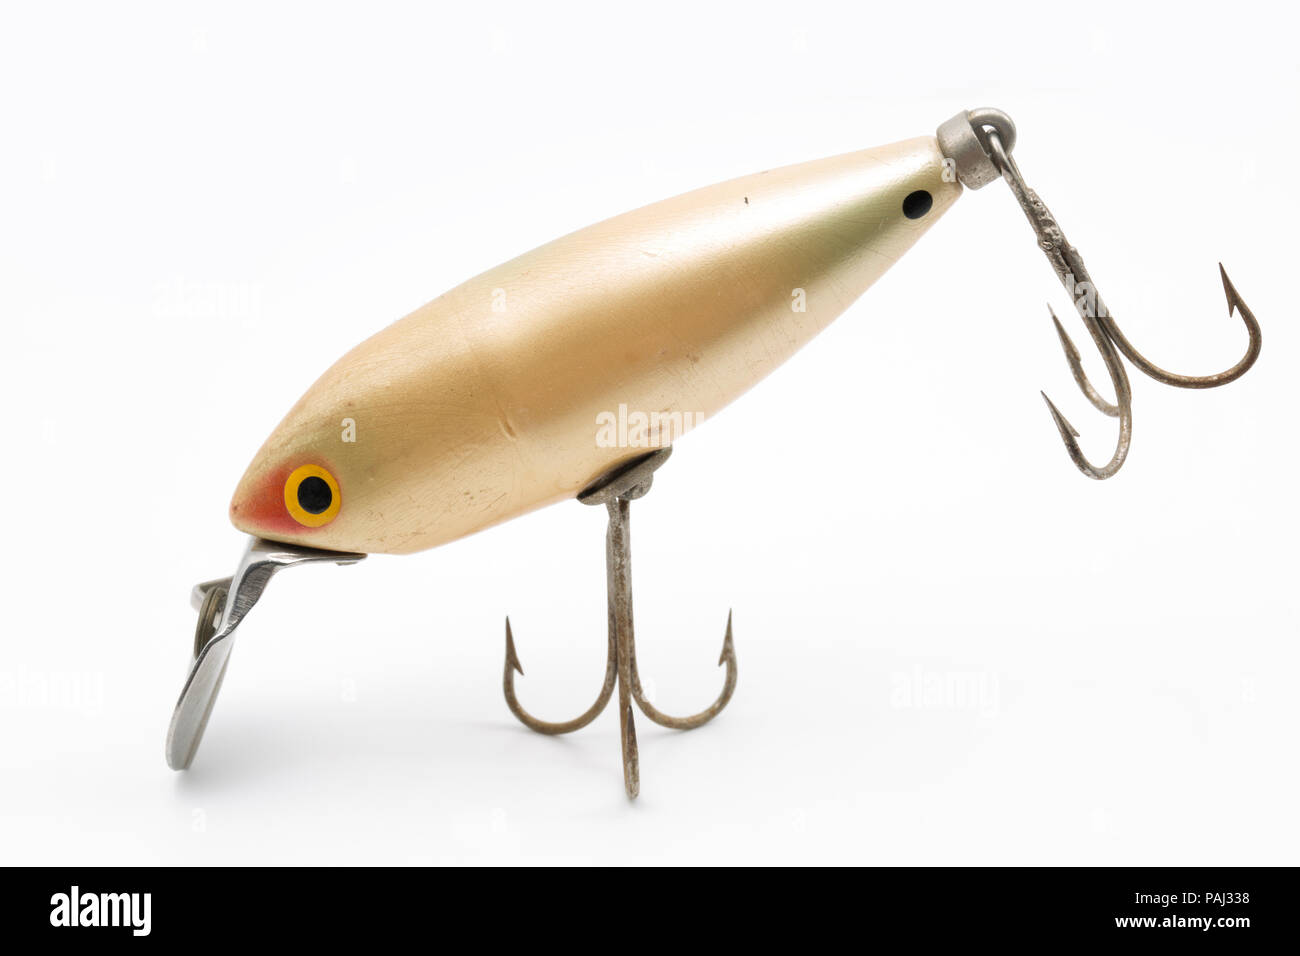 A single vintage fishing lure equipped with treble hooks, possibly by Woods MFG, on a white background. These types of lures for catching predatory fi Stock Photo